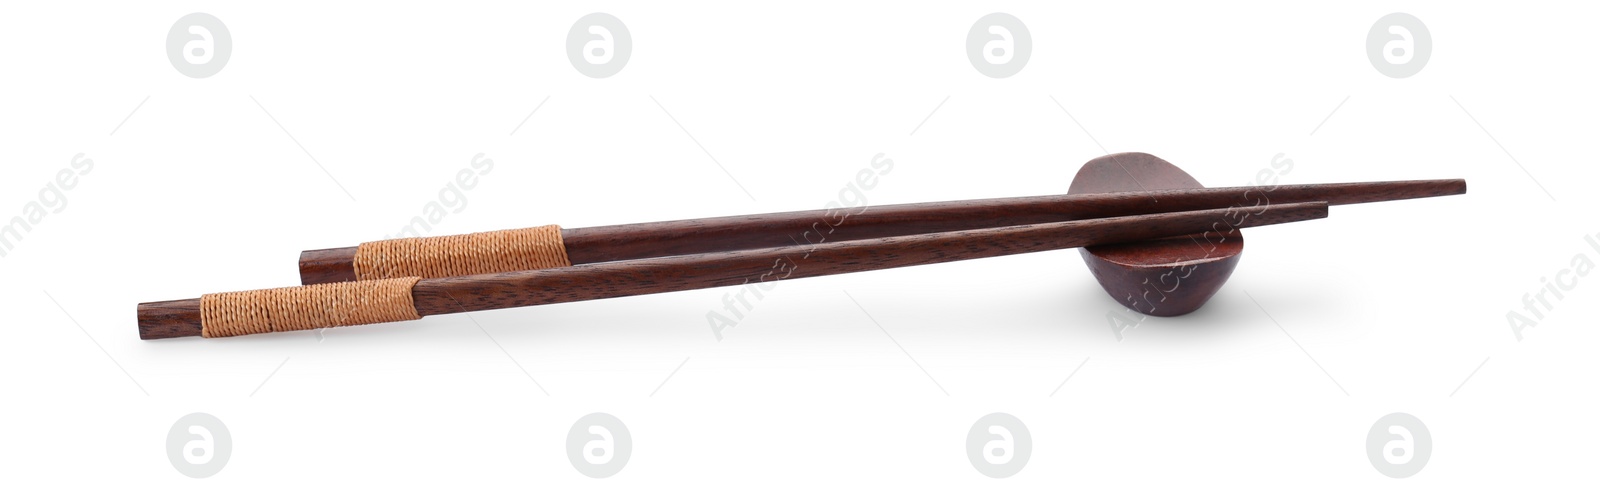 Photo of Pair of wooden chopsticks with rest isolated on white